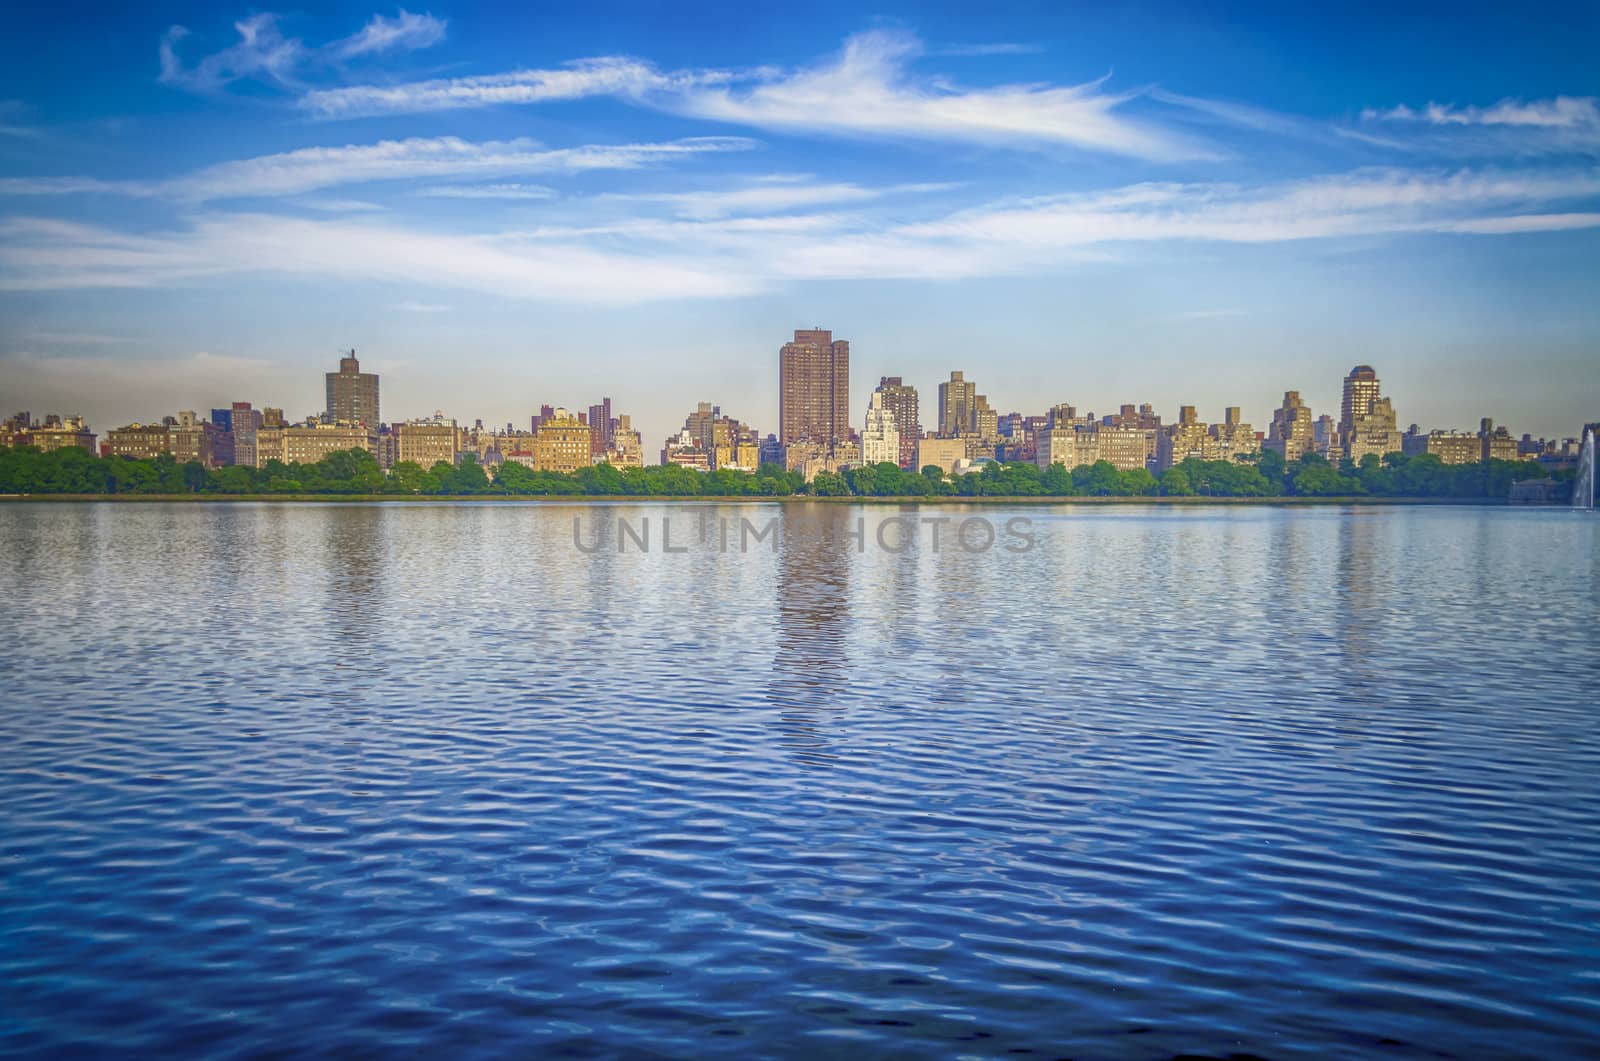 Looking at the Upper East Side from the Jacqueline Kennedy Onassis Reservoir in Central Park, New York